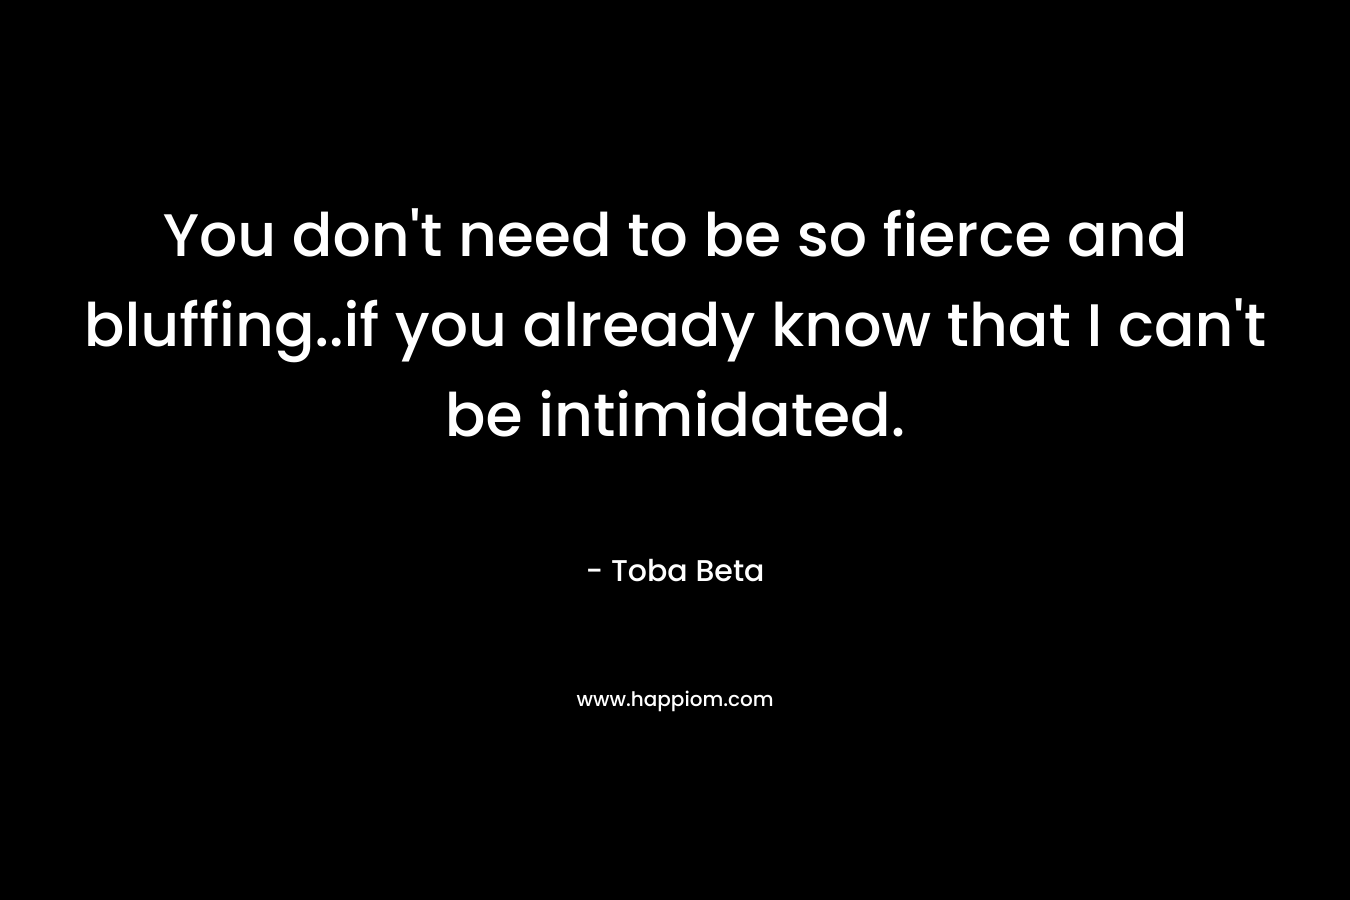 You don’t need to be so fierce and bluffing..if you already know that I can’t be intimidated. – Toba Beta